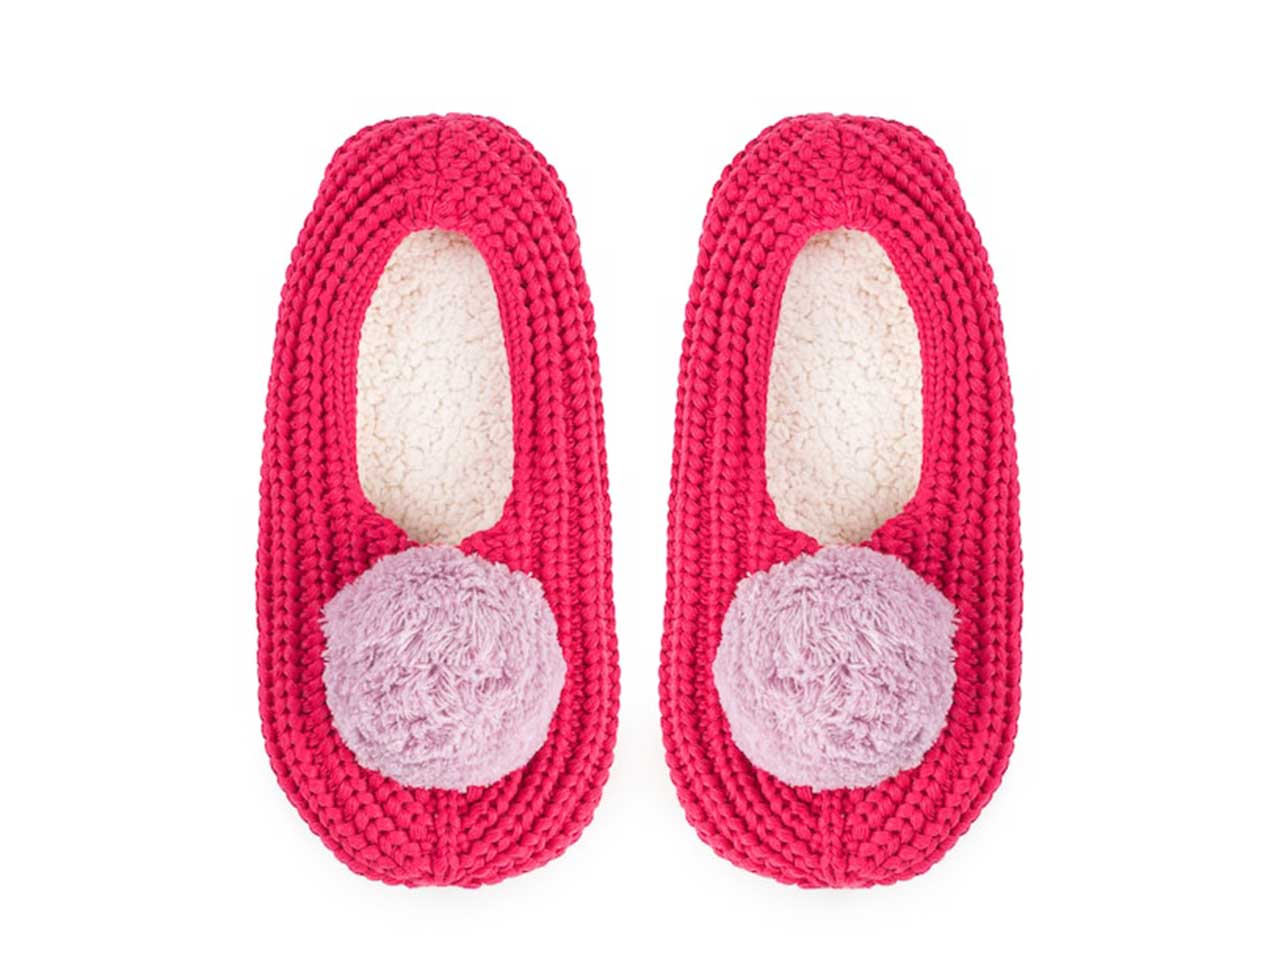 A pair of pink knitted slippers with purple pompoms seen from above.